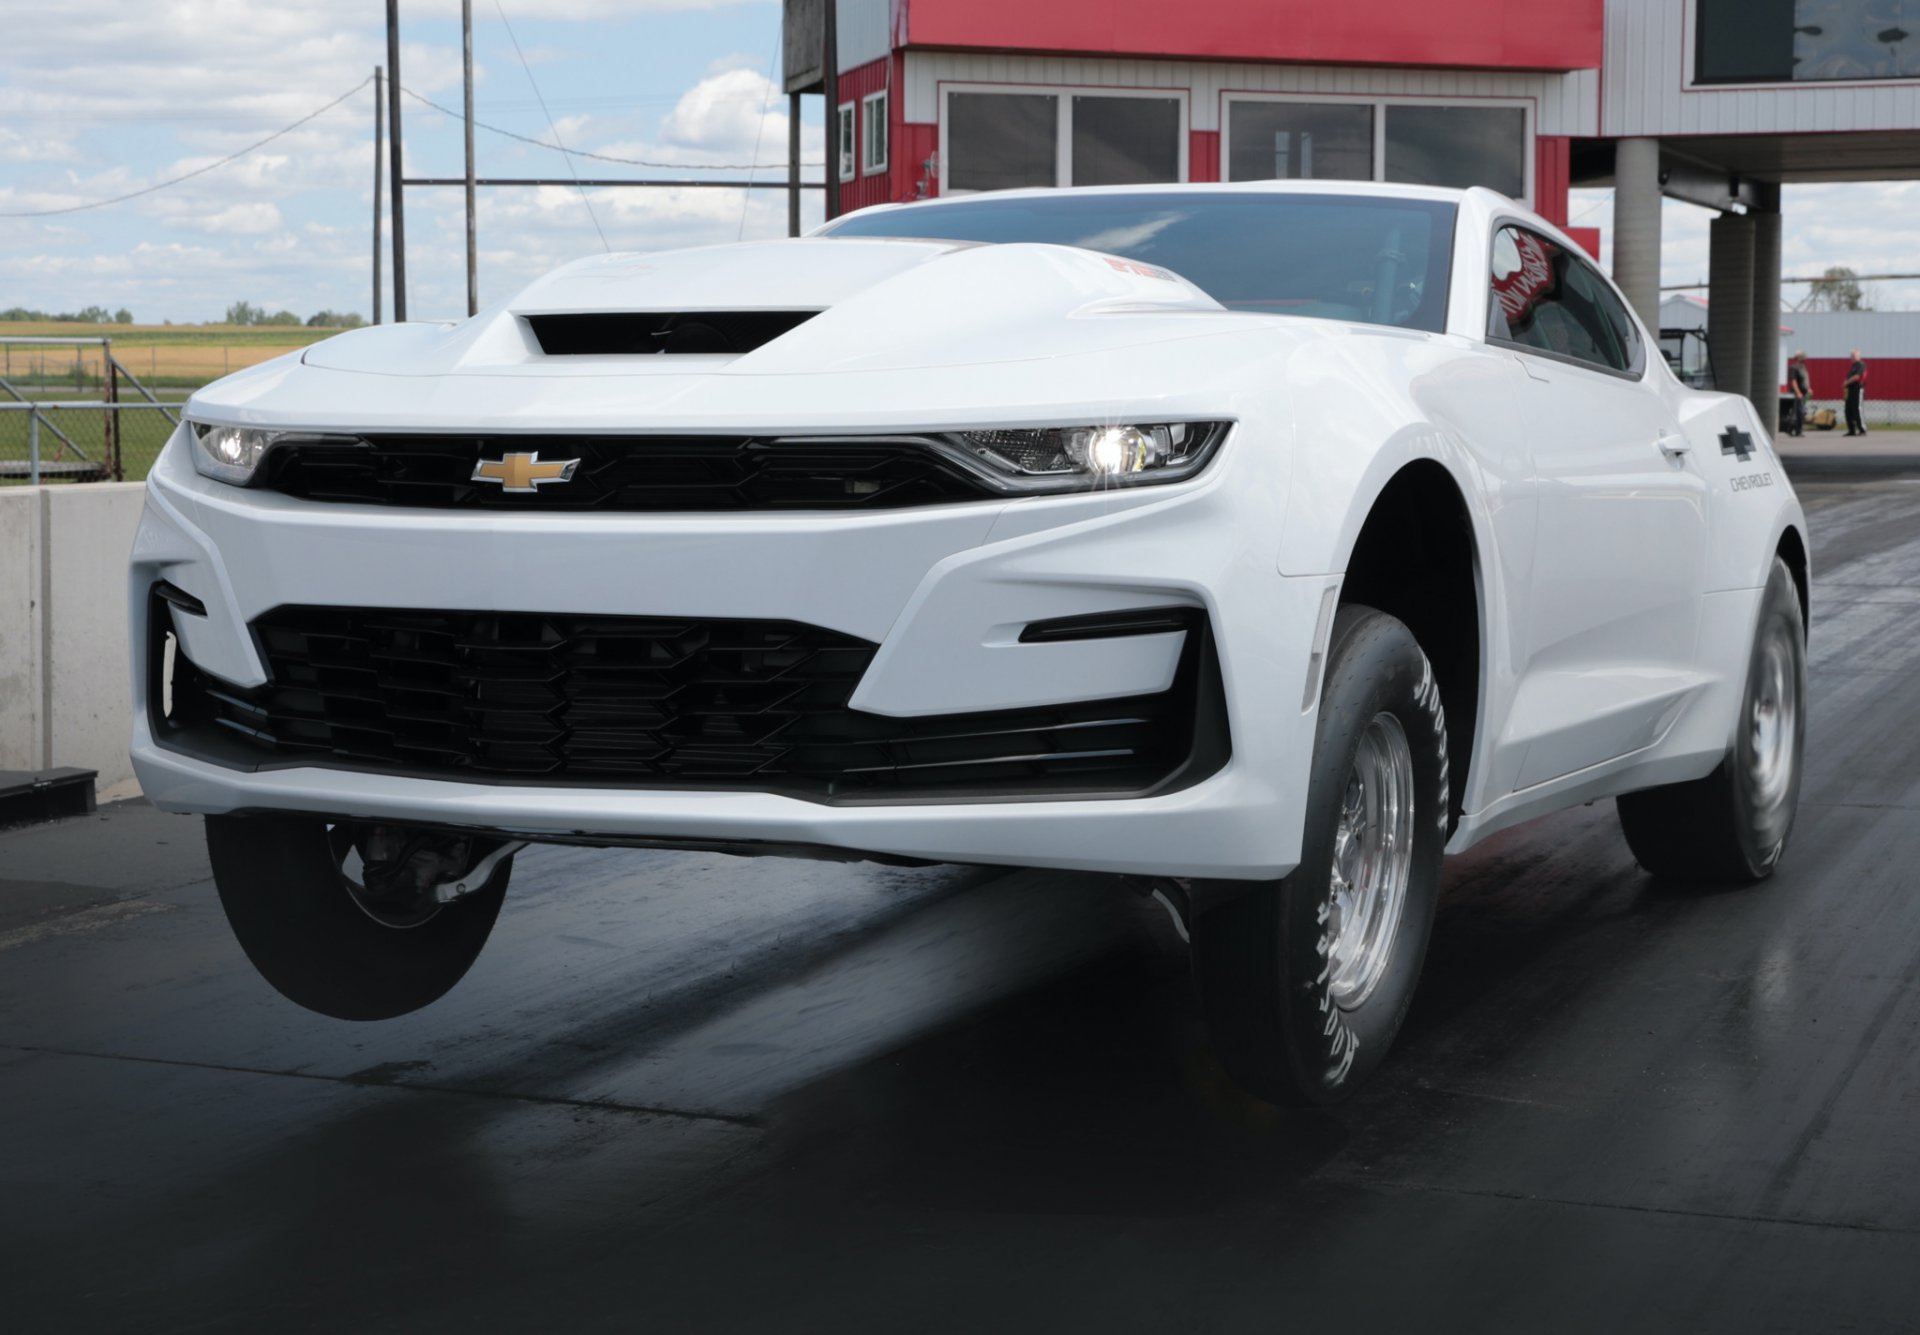 COPO Camaro returns, and with bigblock V8 and no production limits